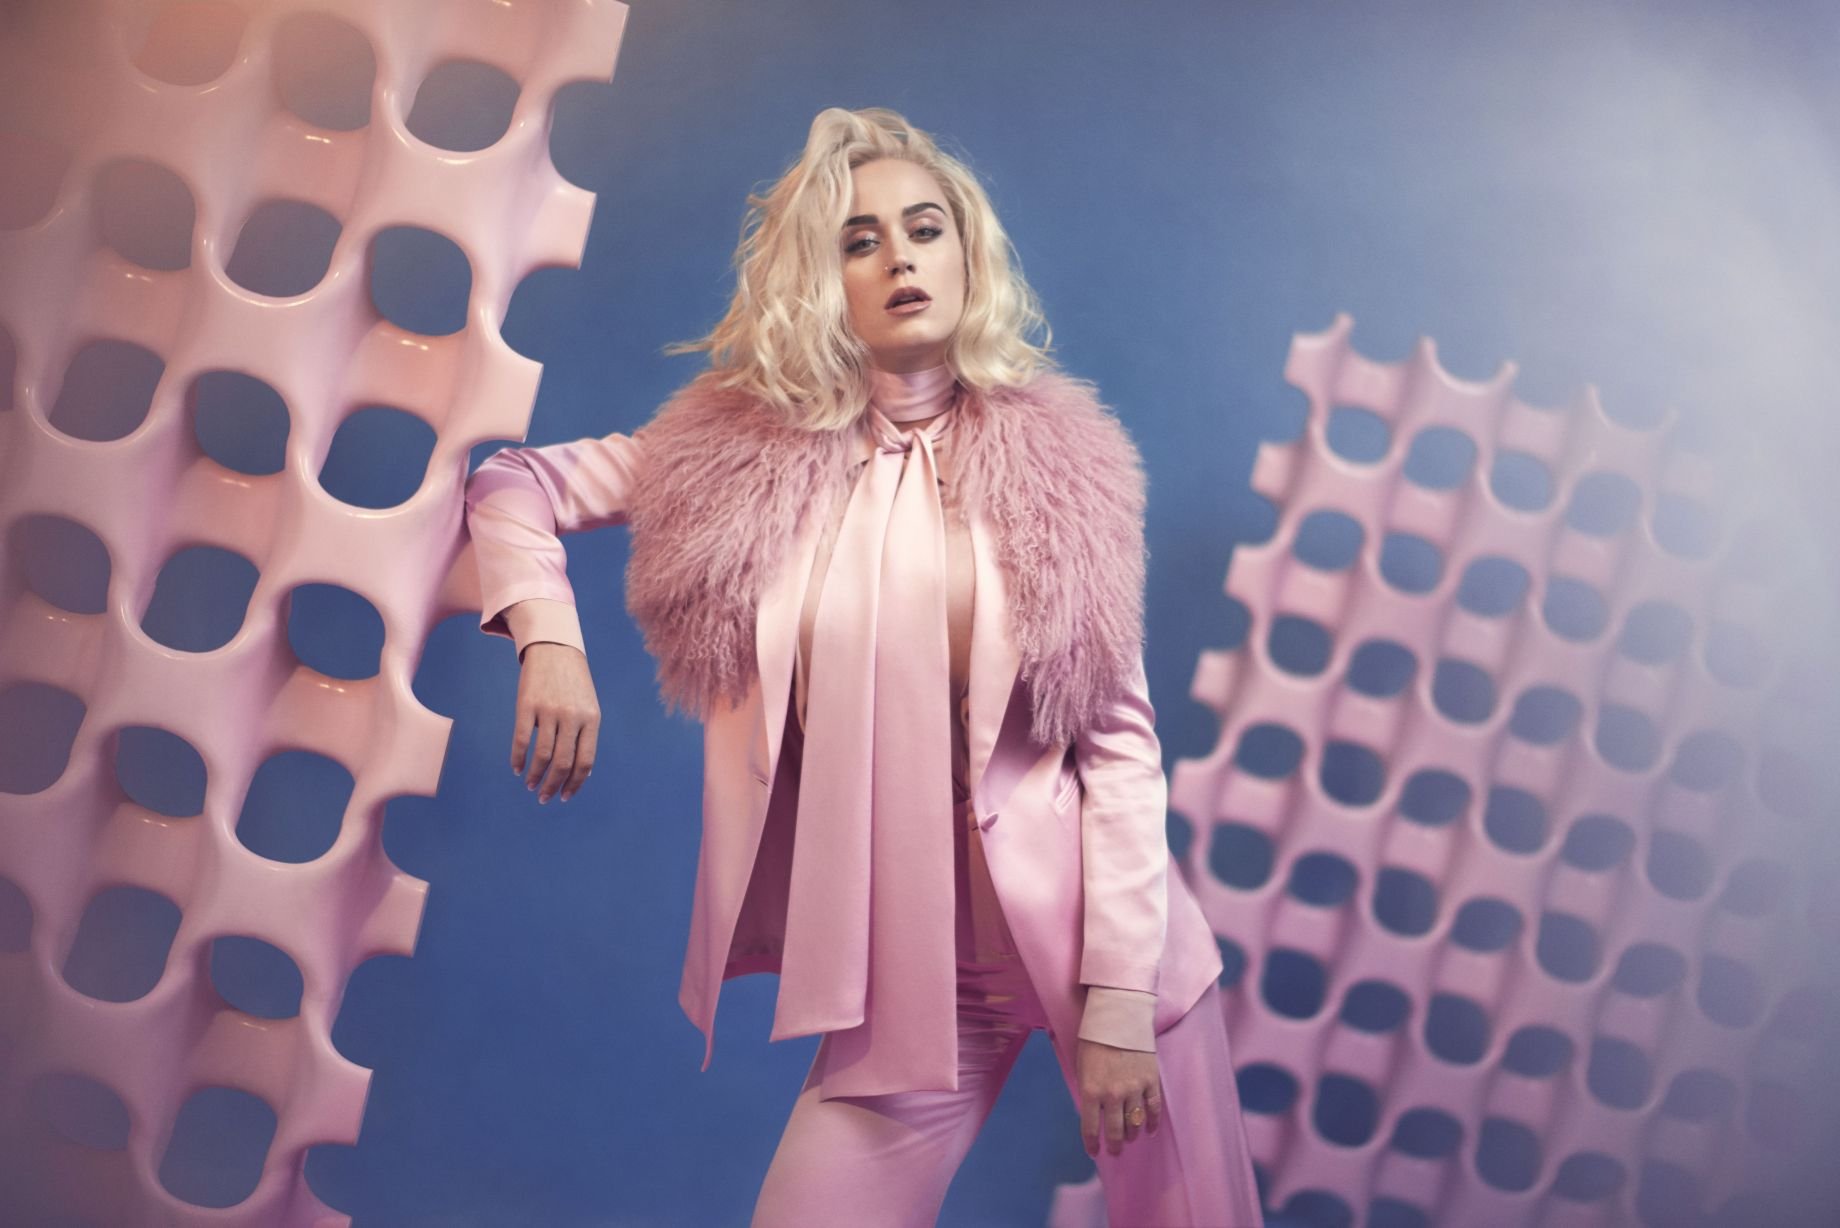 Ecco “Chained to the rhythm” di Katy Perry